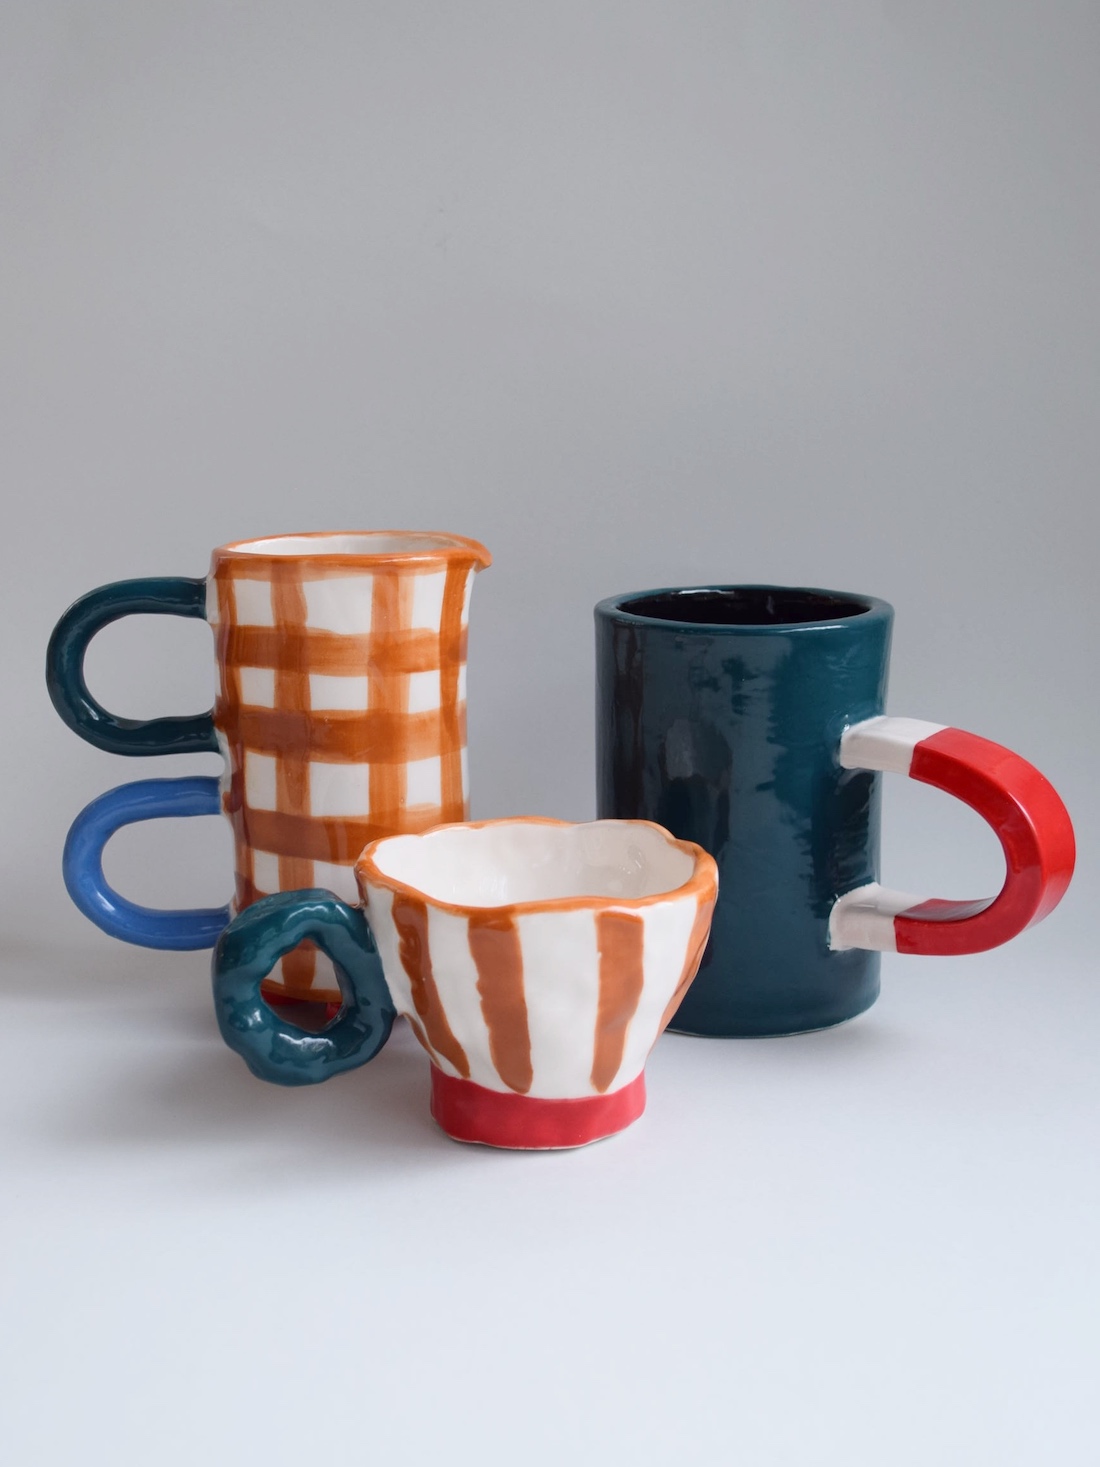 Collection of mugs from Kiwi Poca